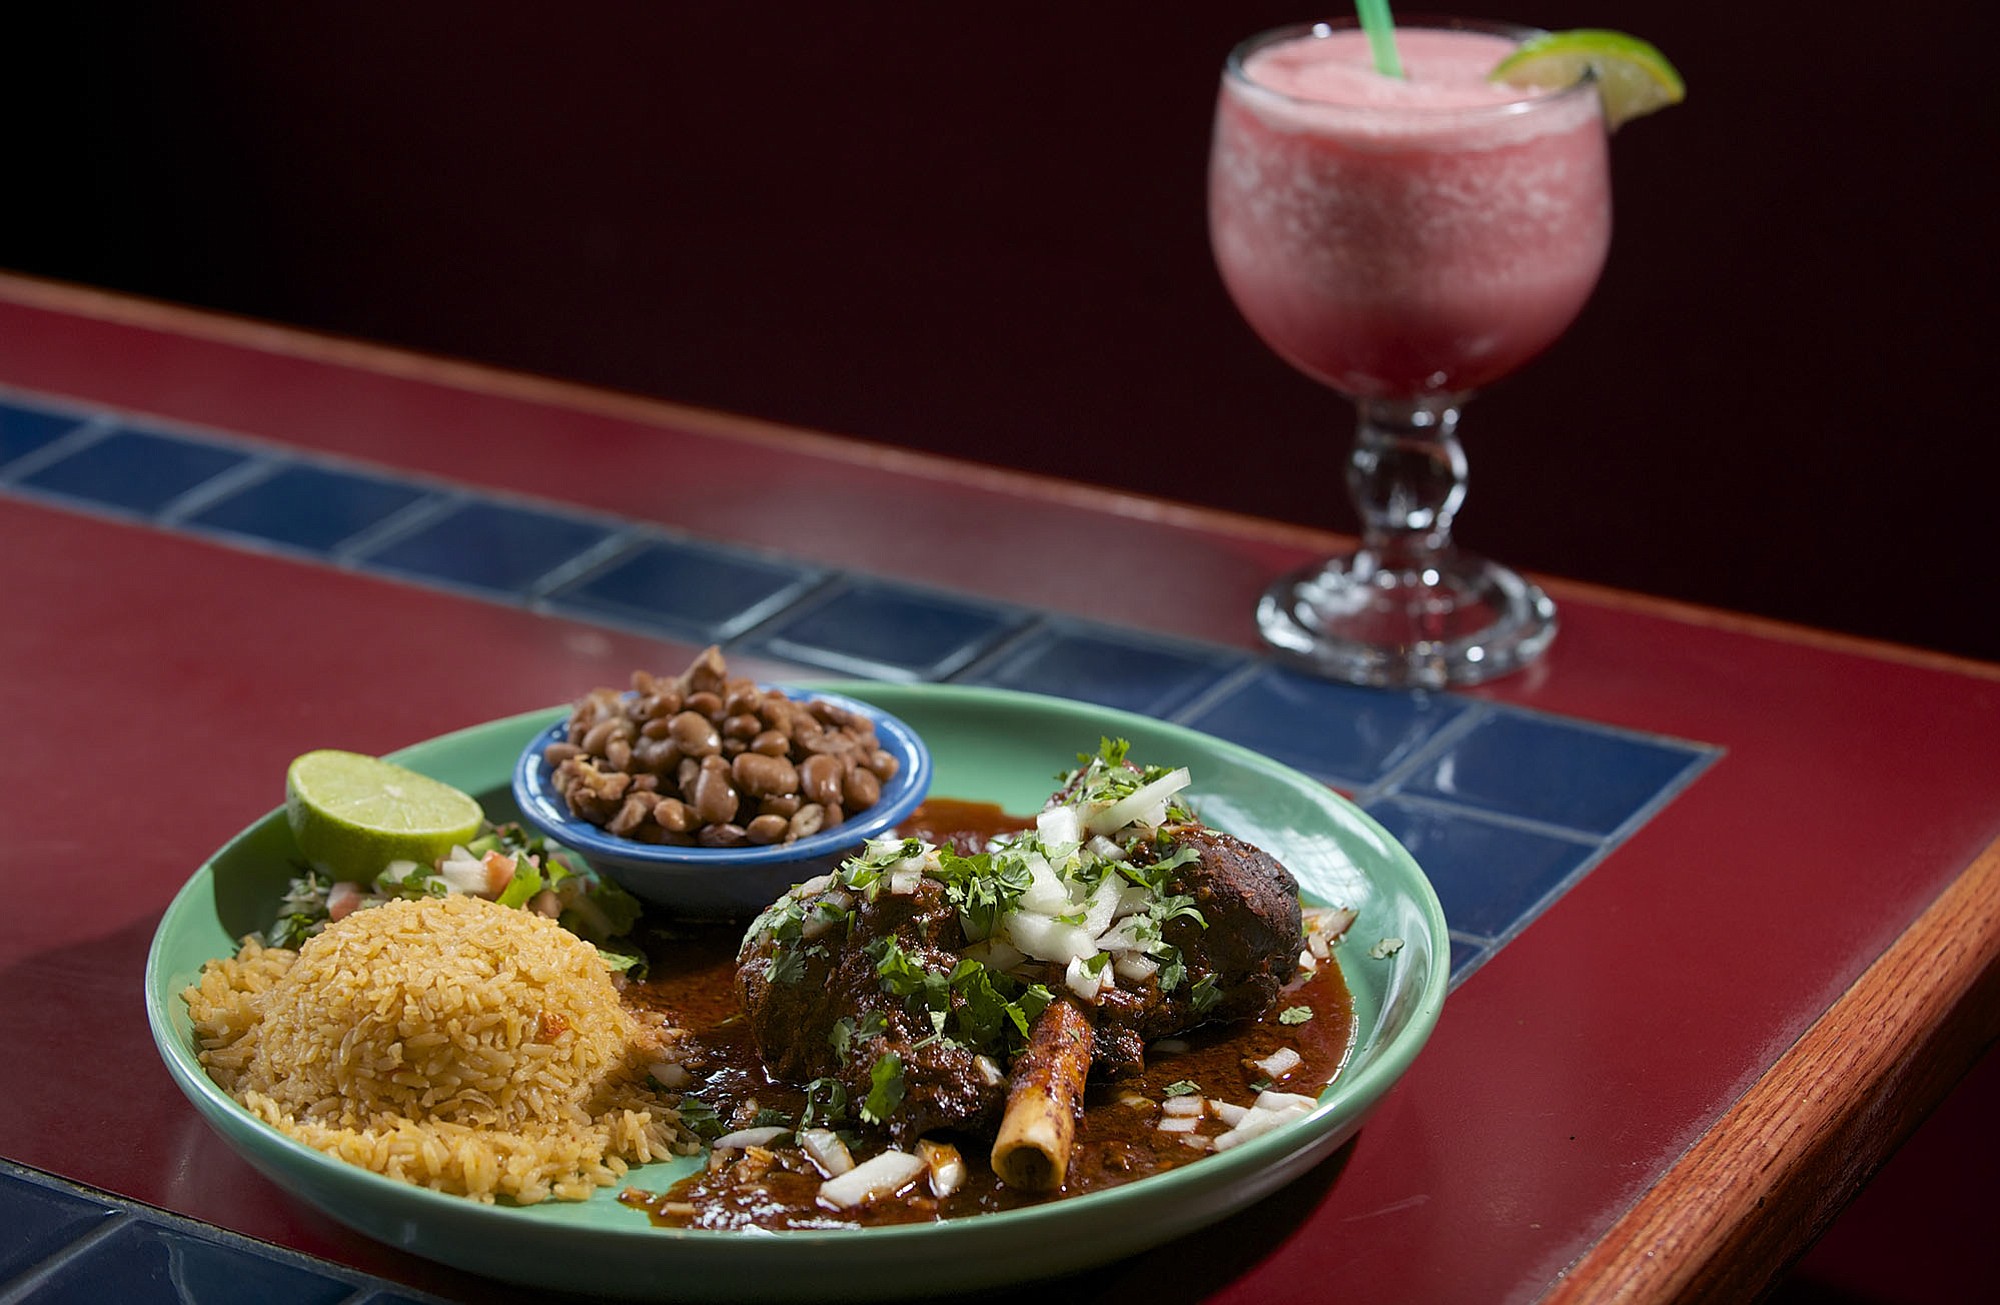 Los Dos Compadres offers tasty Mexican fare - The Columbian